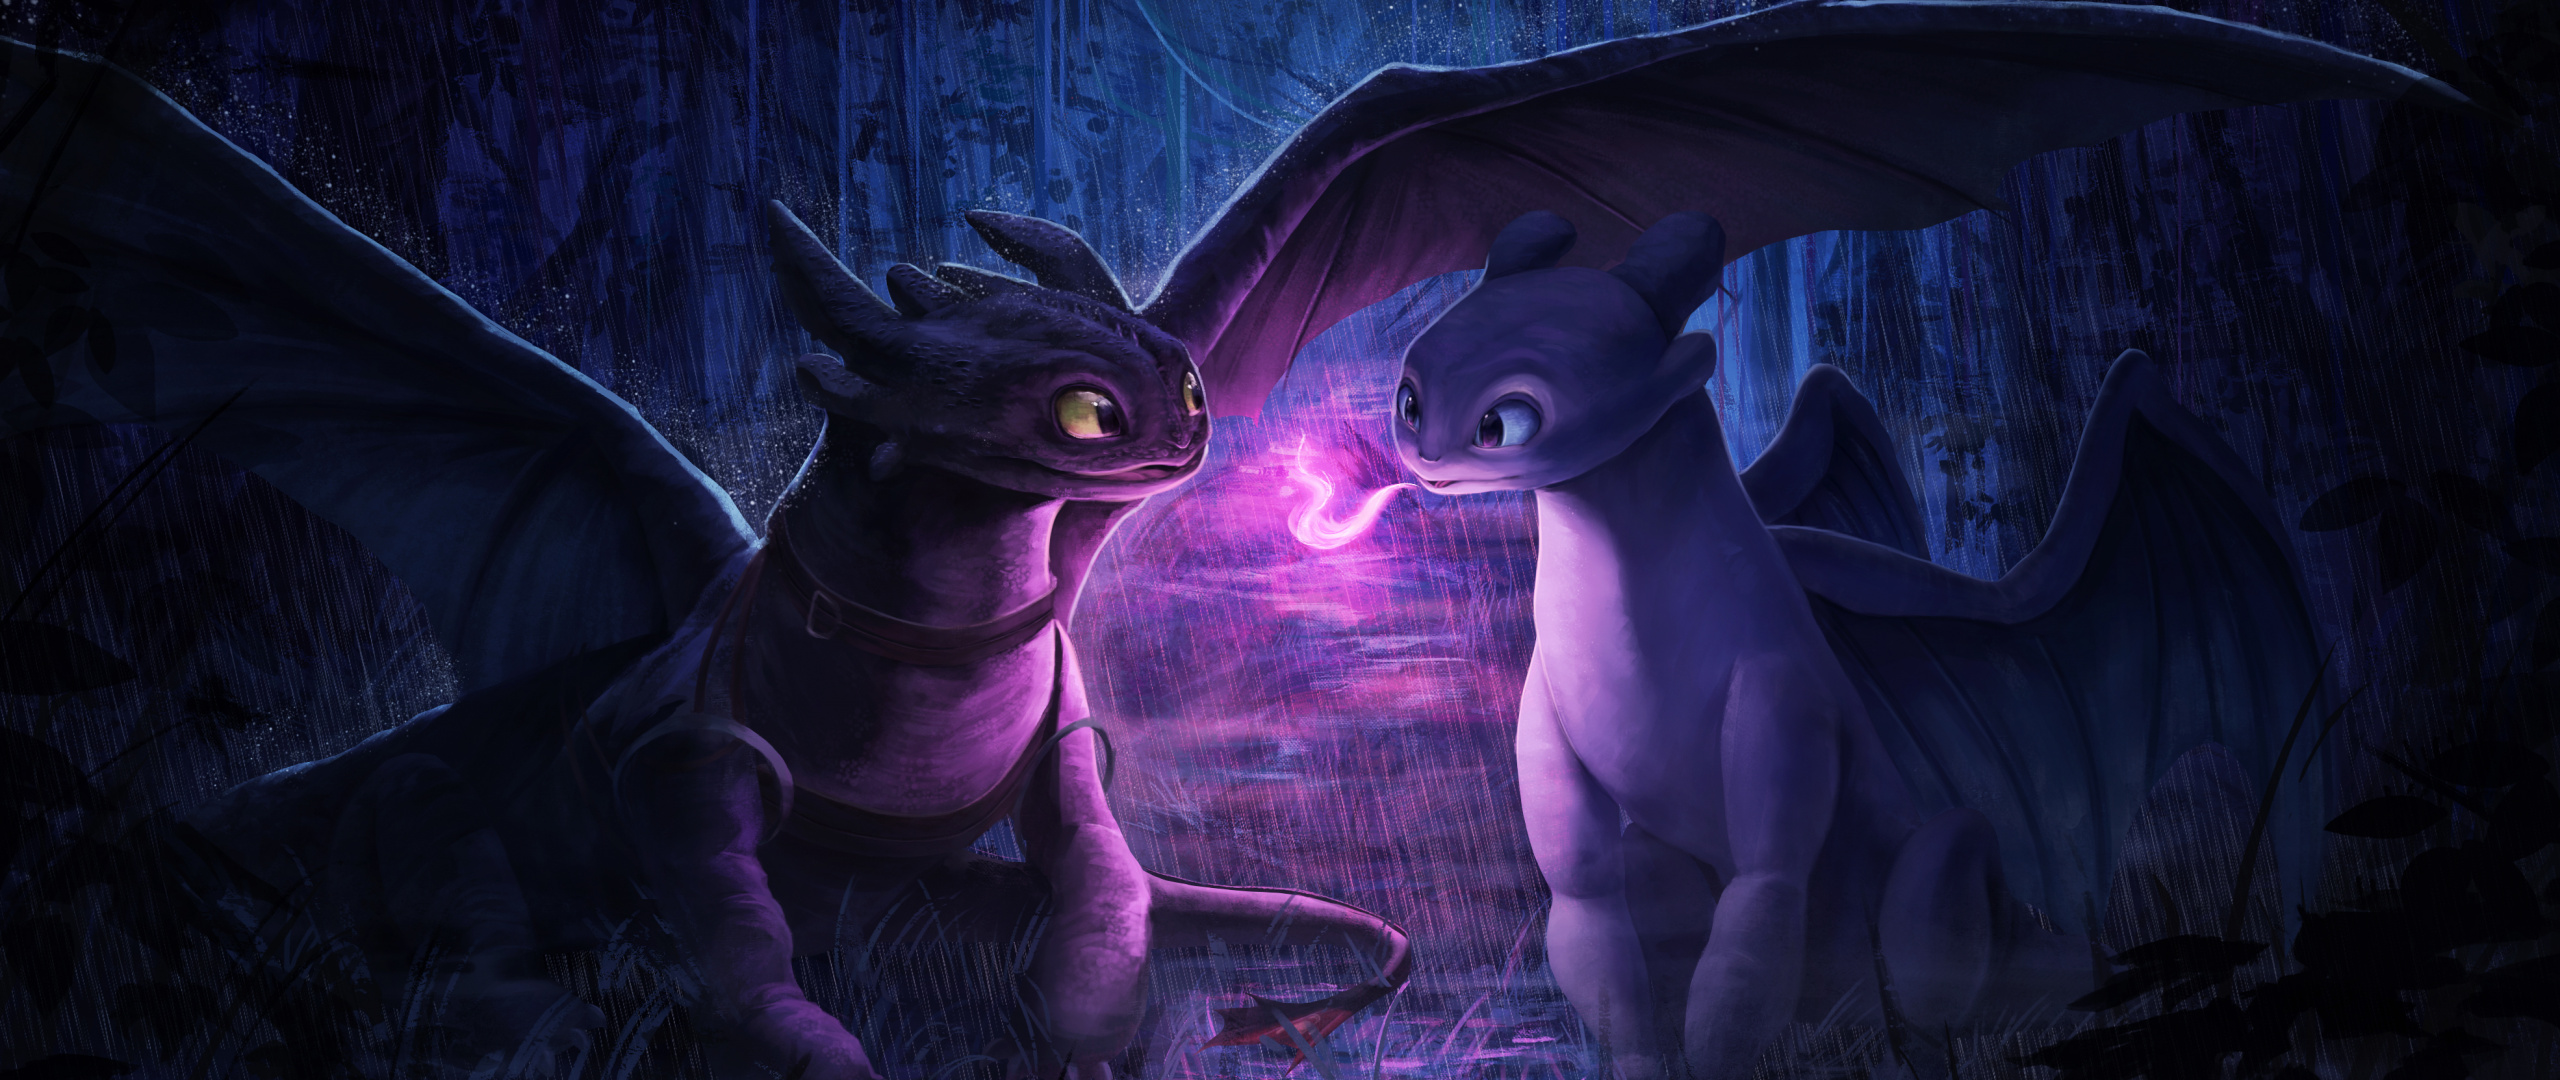 Download Dragons, couple, art, animation wallpaper, 2560x Dual Wide, Widescreen